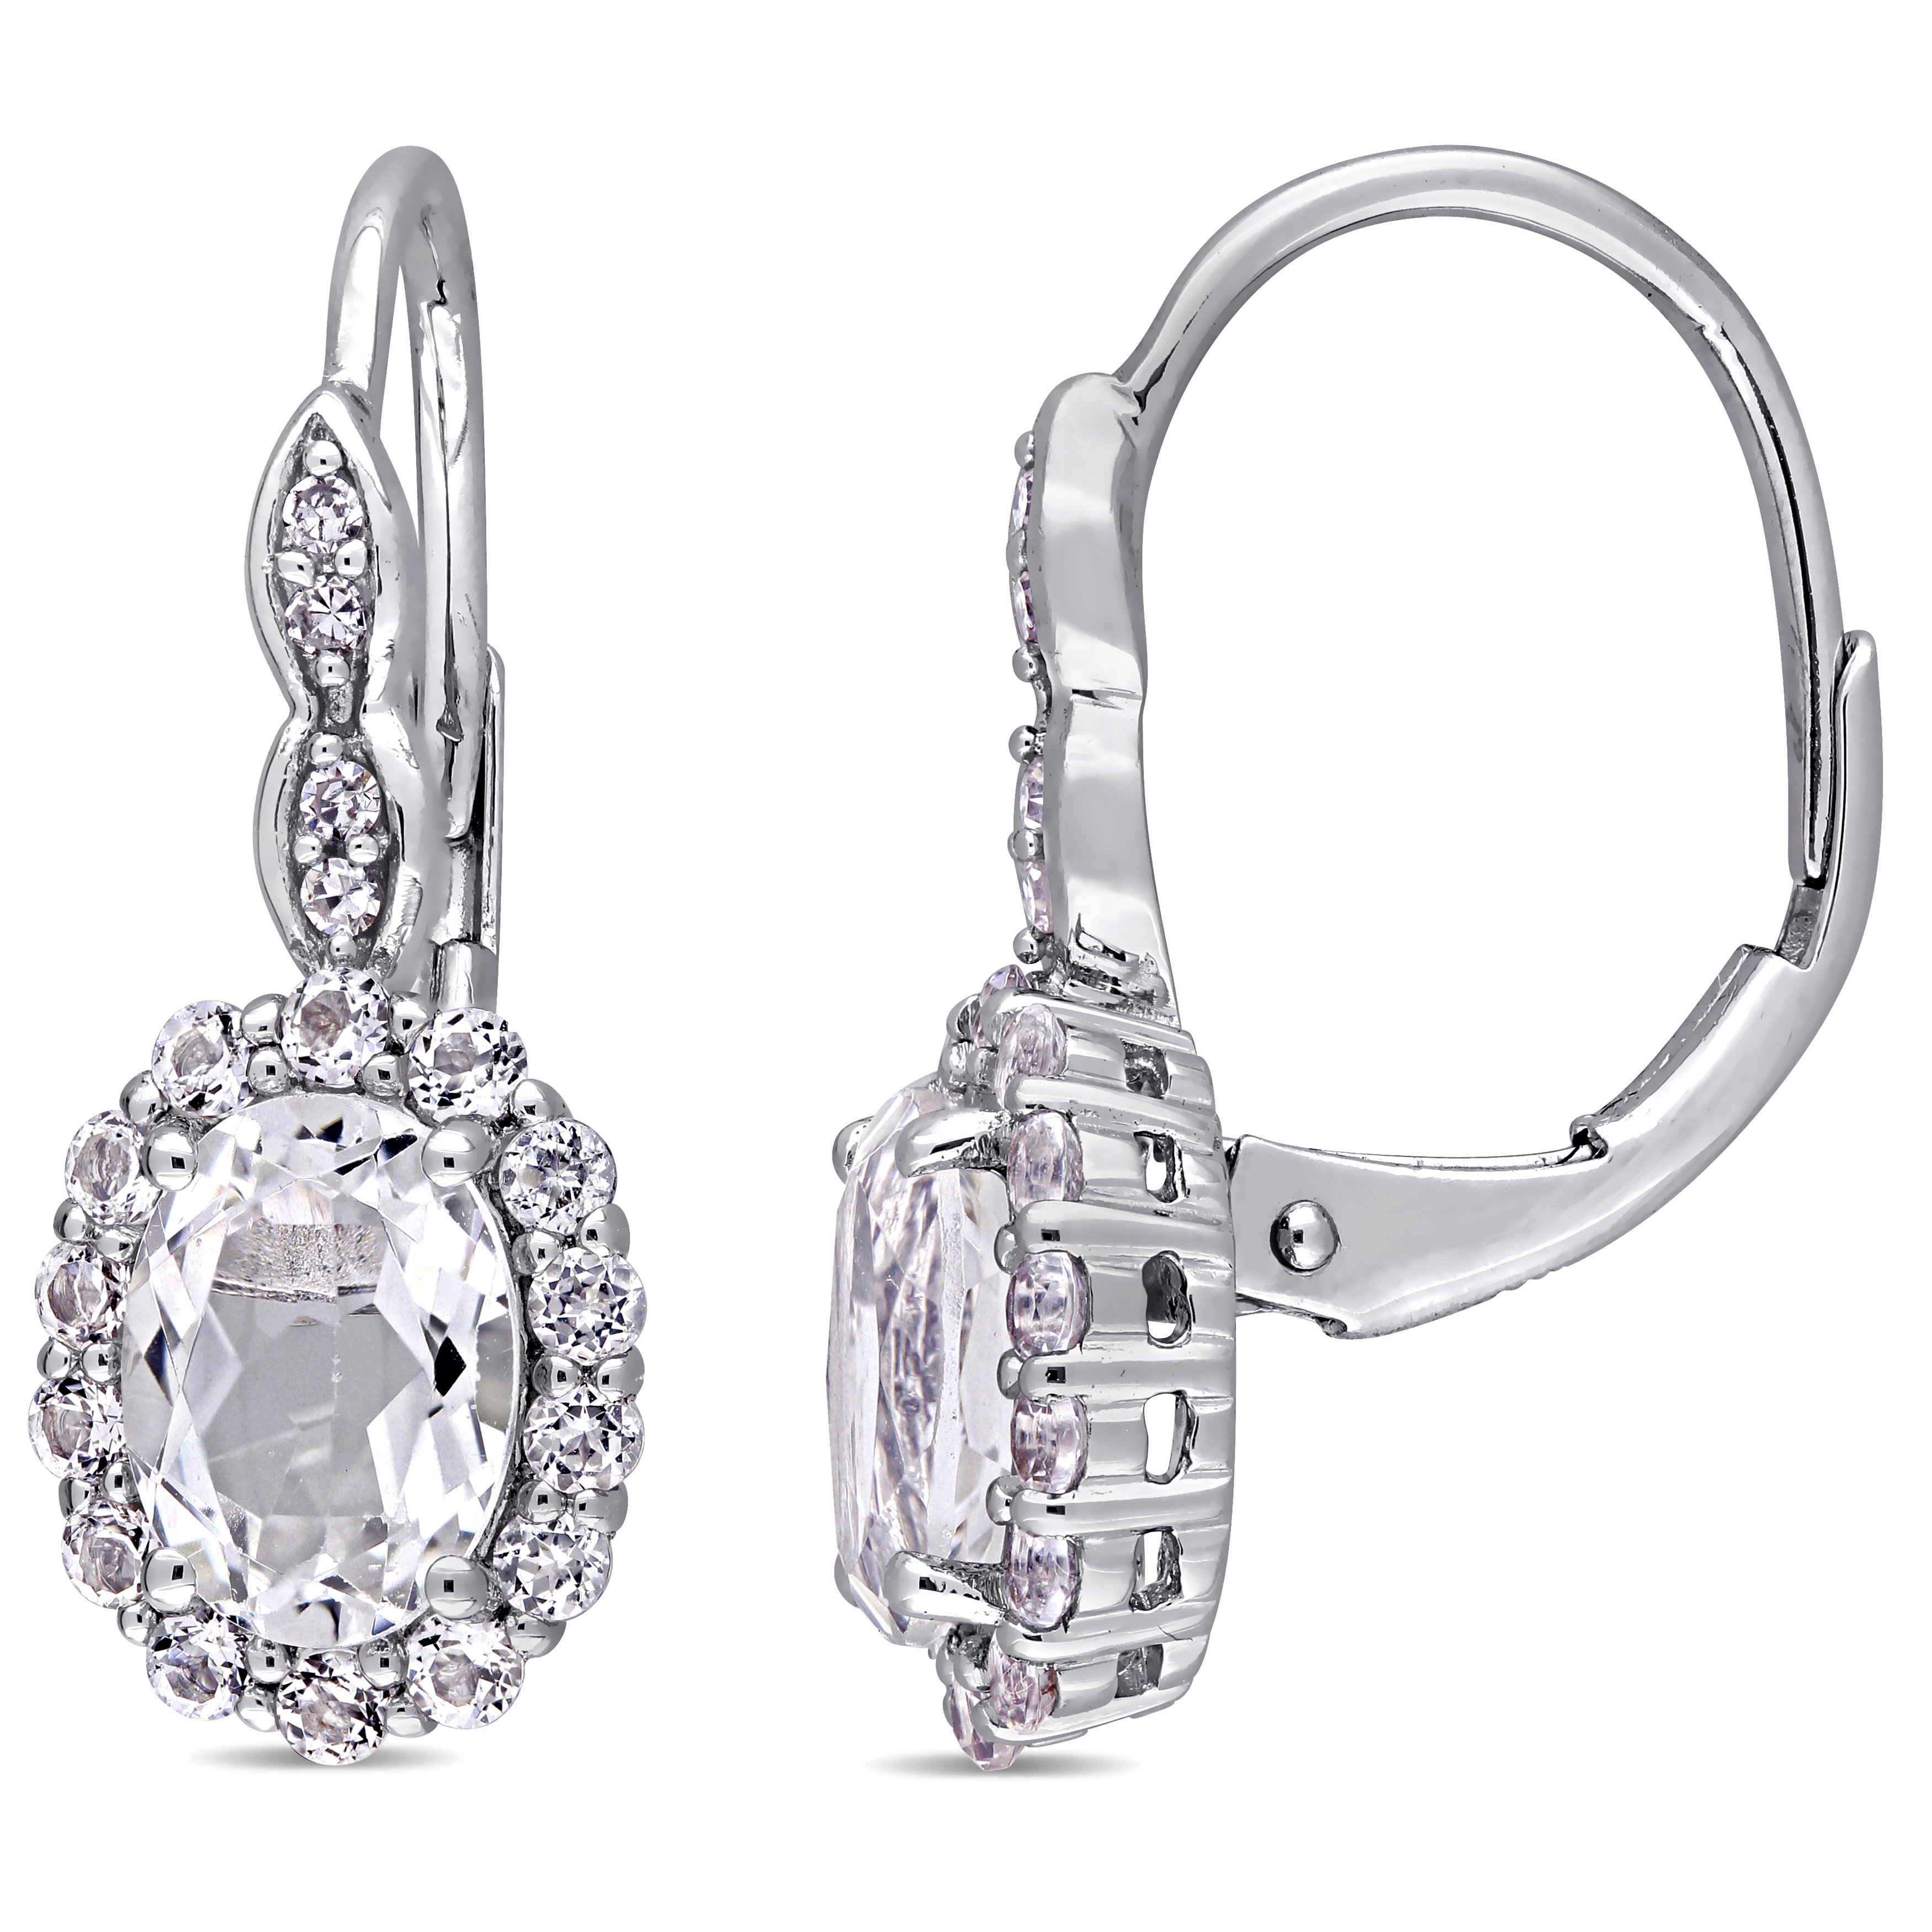 2 5/8 CT TGW White Topaz and Diamond Accent Vintage LeverBack Earrings in 14k White Gold